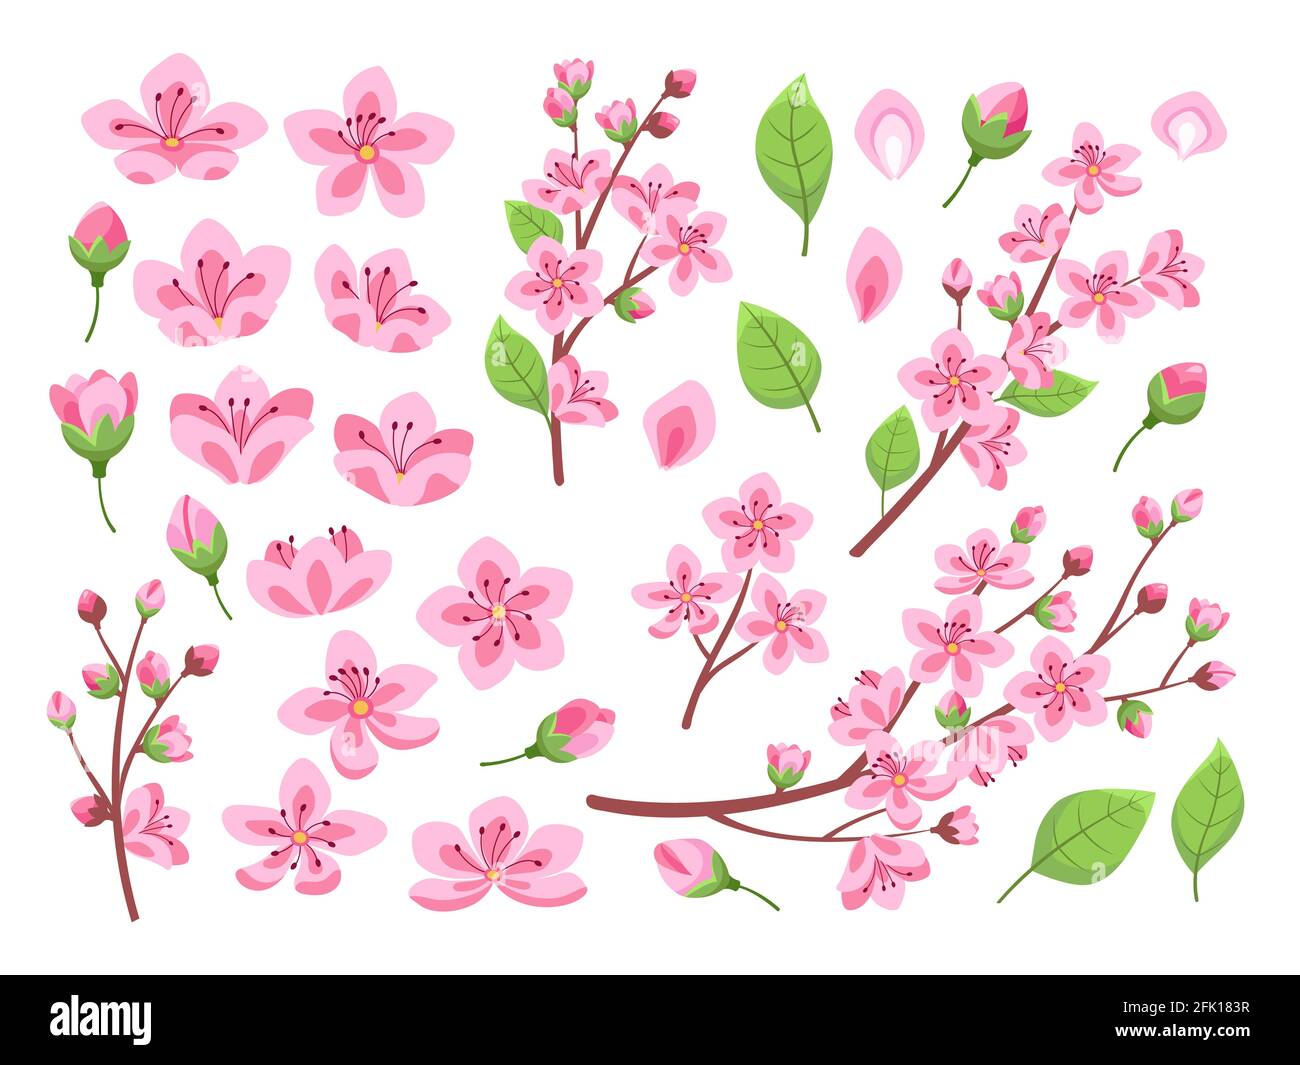 Sakura blossom. Asia cherry, peach flowers. Isolated almond garden or park plants. Pink budding floral petal and branches, leaf vector set Stock Vector